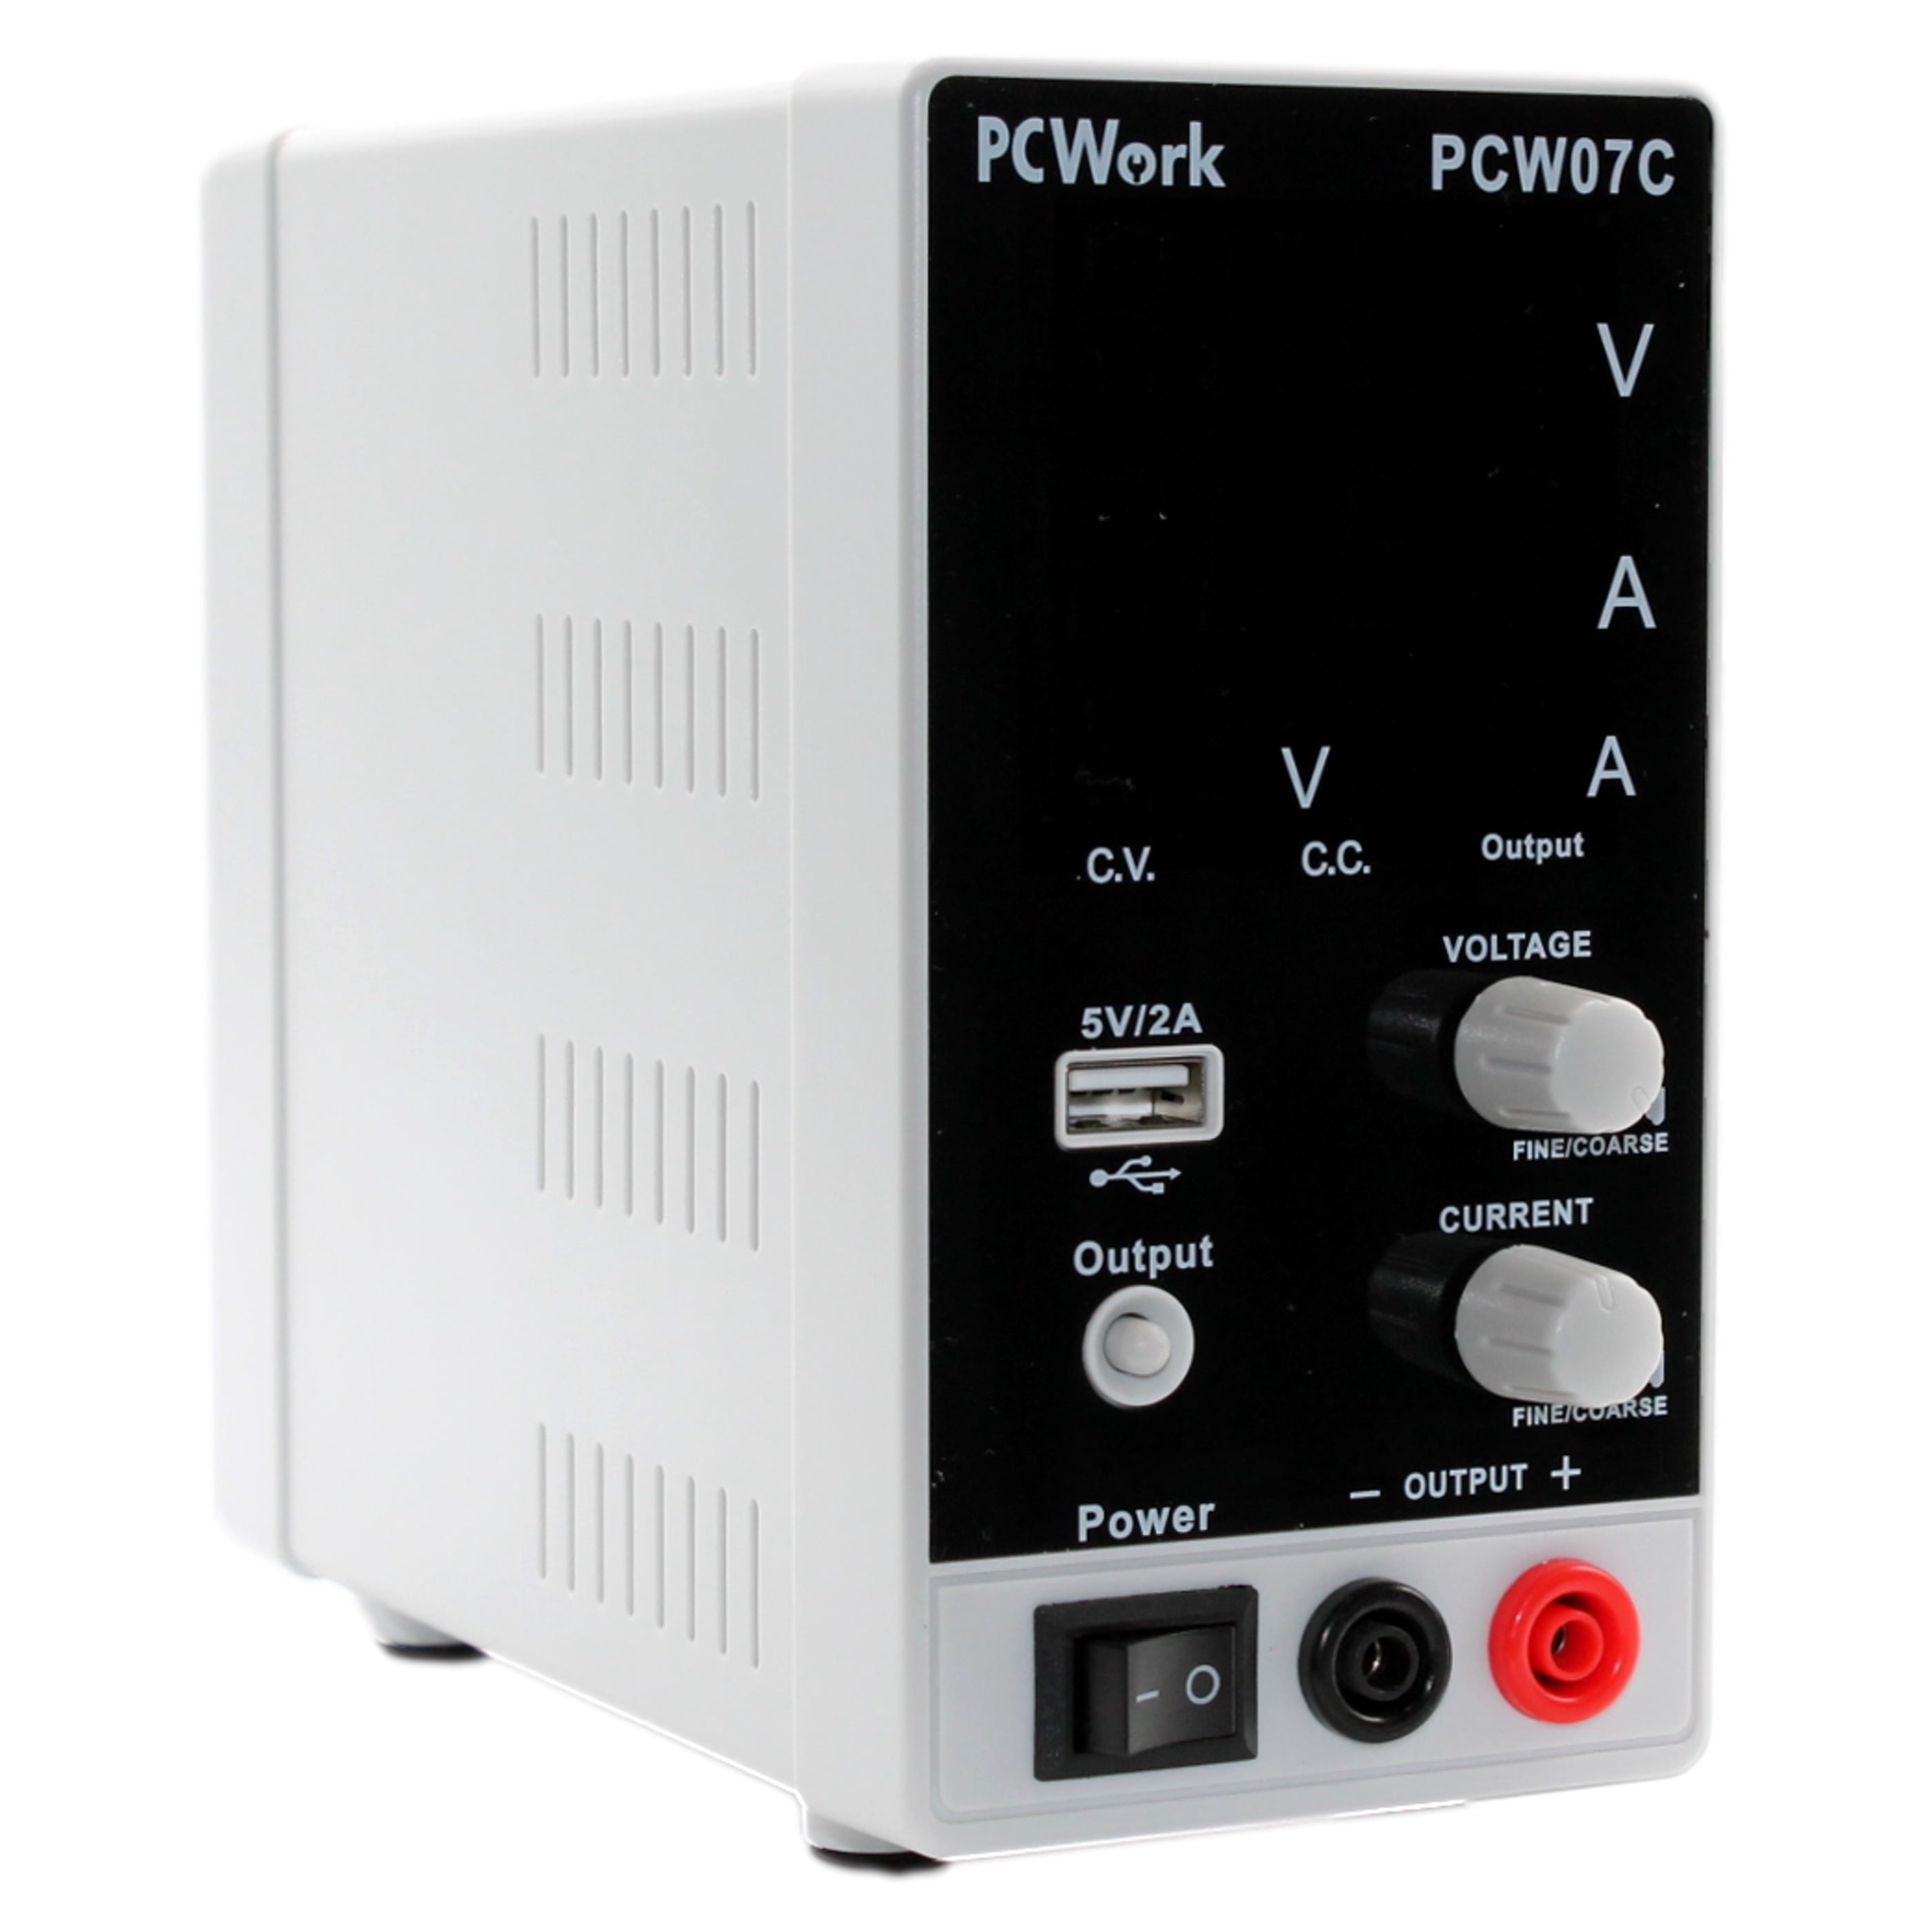 PCW07C Laboratory Power supply, DC Switching Power Supply 0-30V, 0-5A